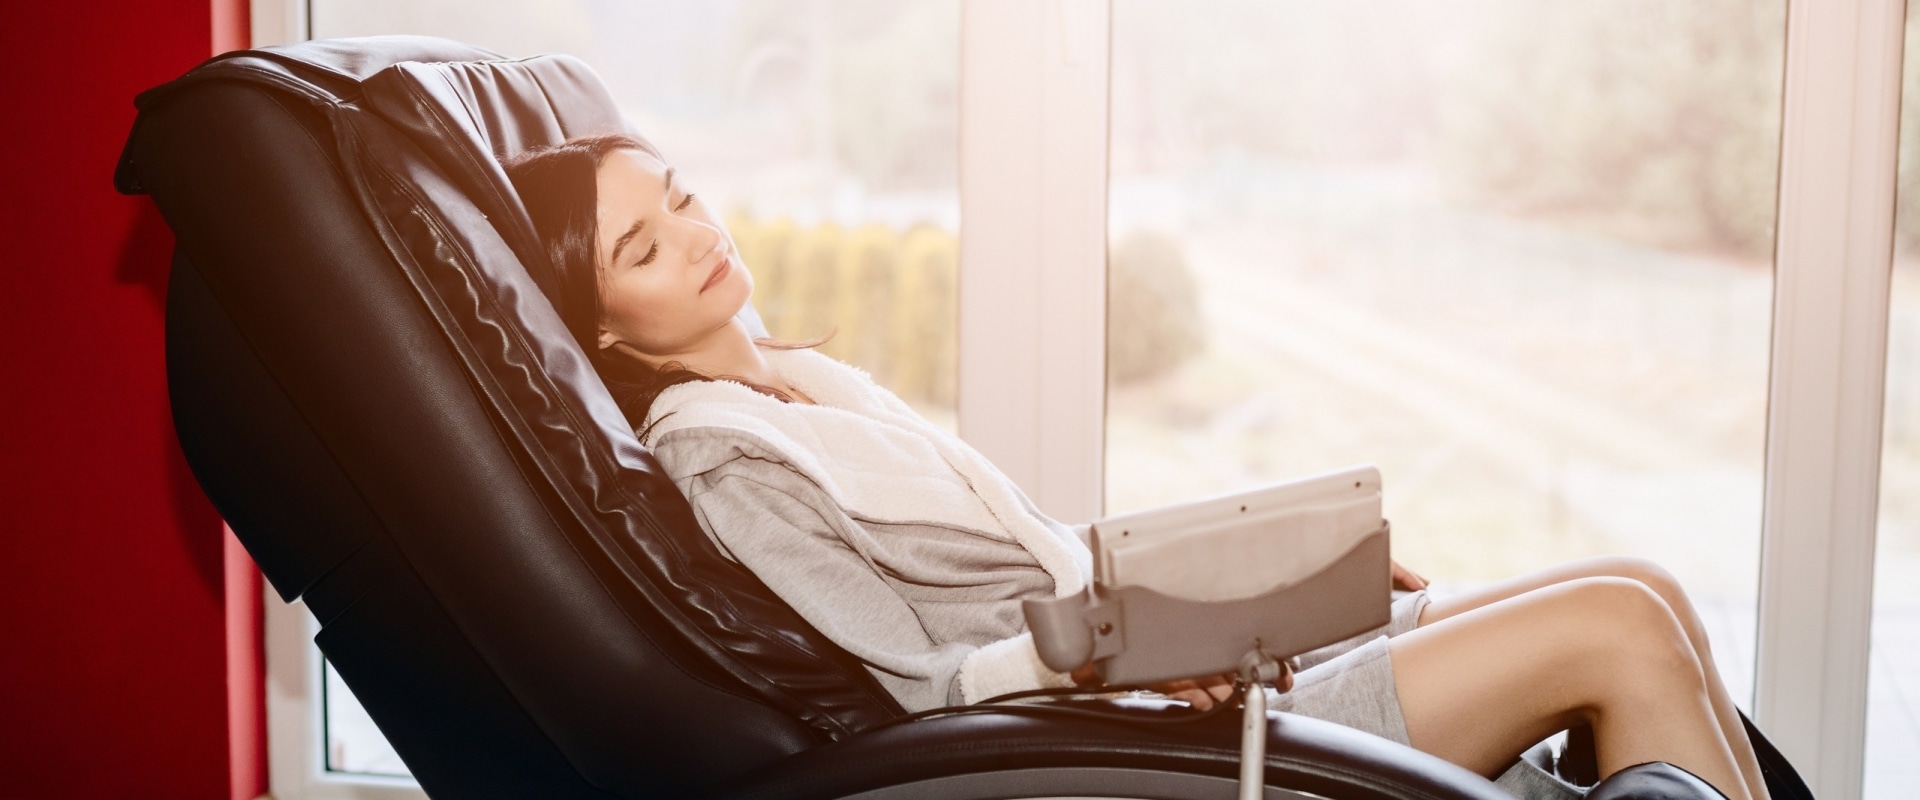 How Massage Chairs Work? Functioning of Massage Chairs